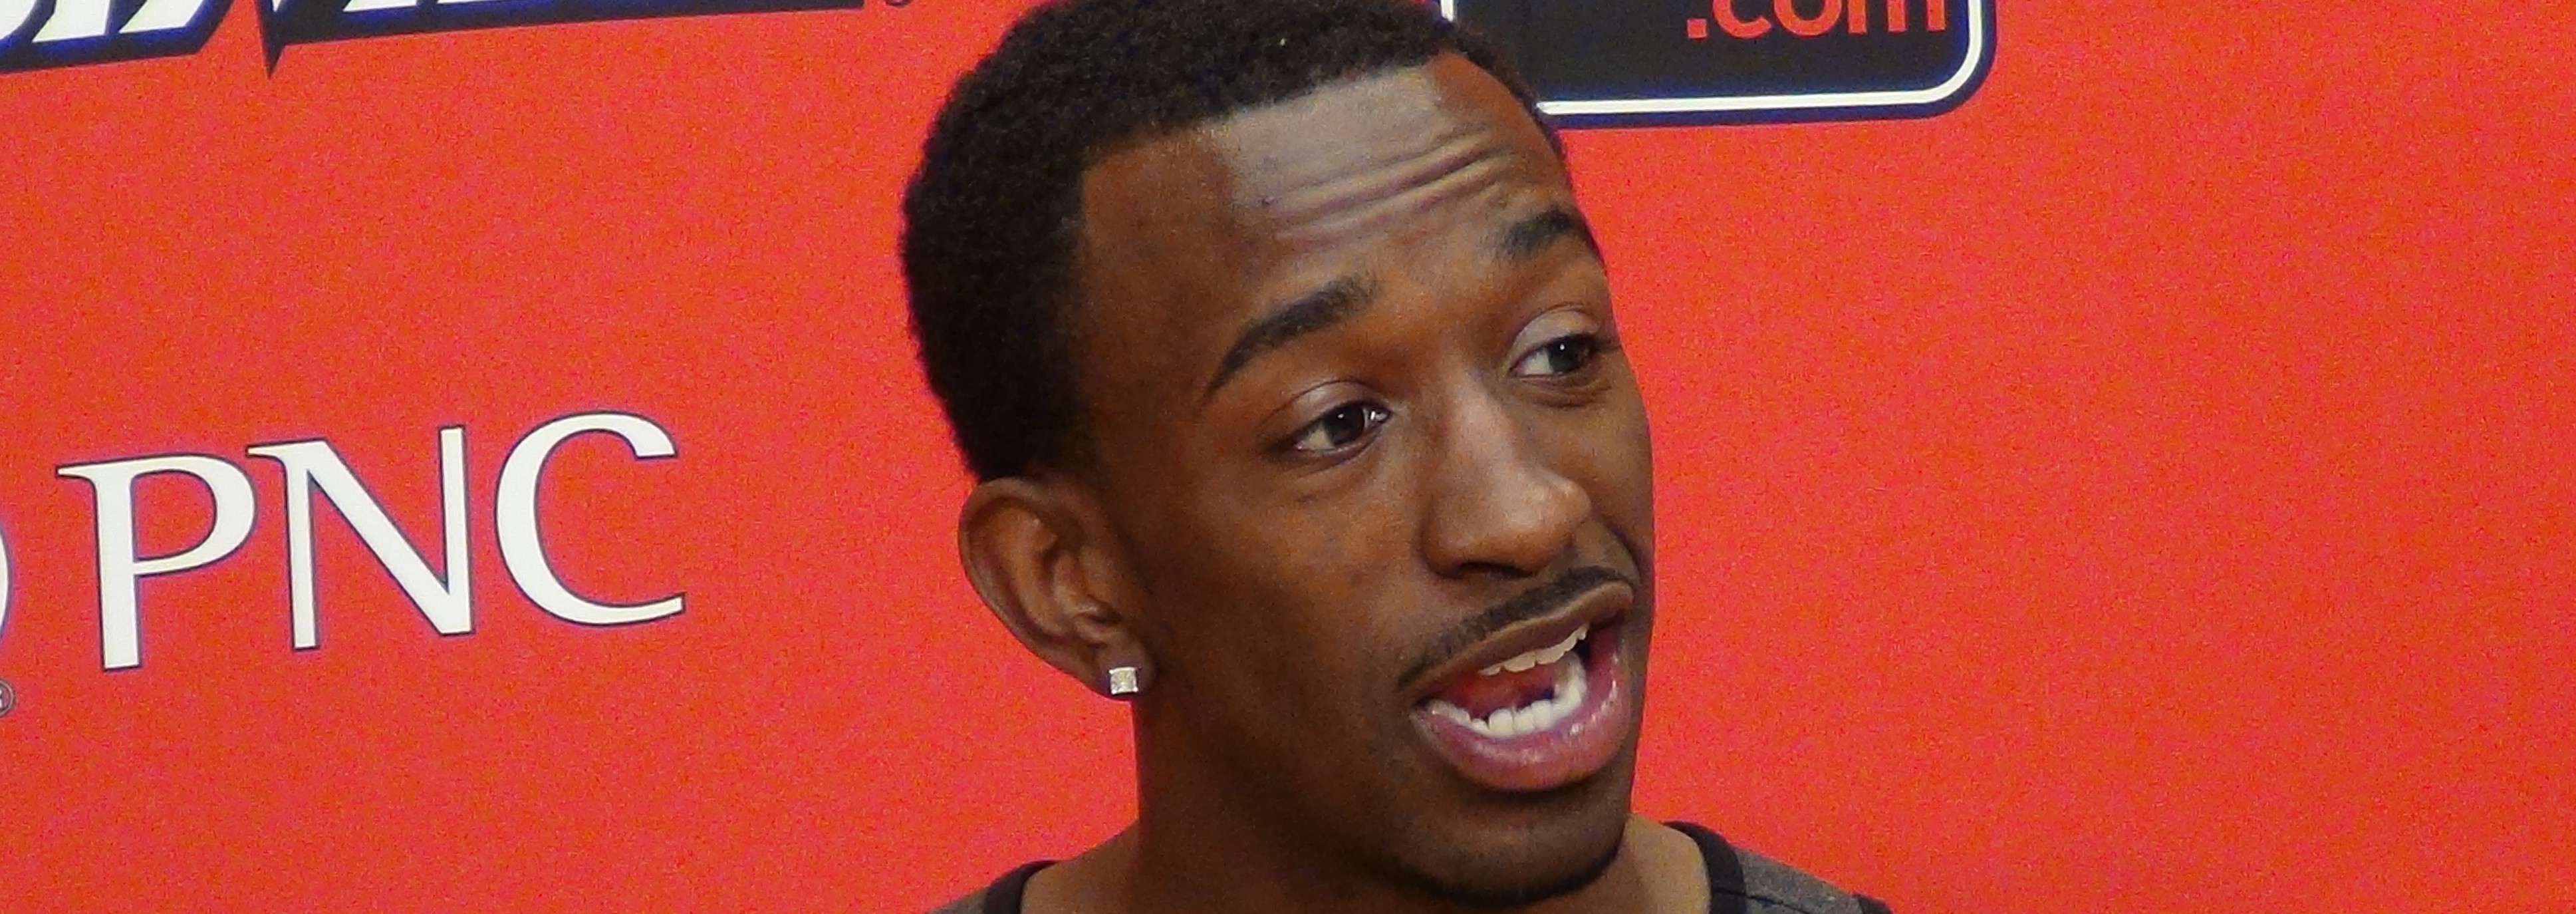 Russ Smith on 2014 Draft Night Gives Interview about getting selected by Philadelphia 76ers and then traded to the New Orleans Pelicans Photo by Mark Blankenbaker